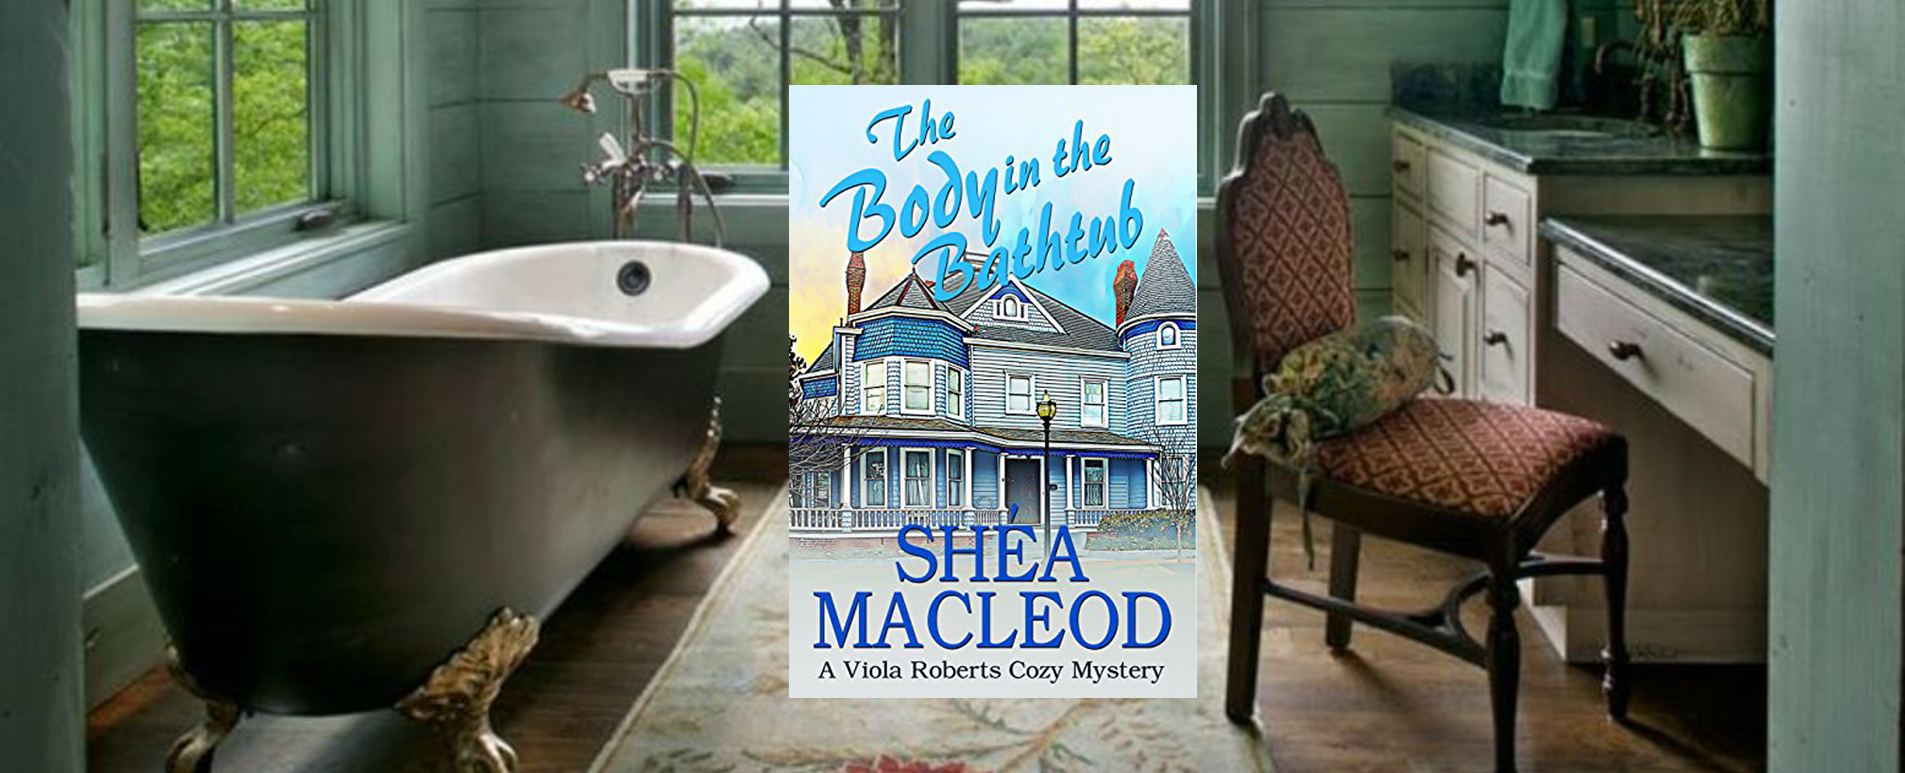 New Release: The Body in The Bathtub!